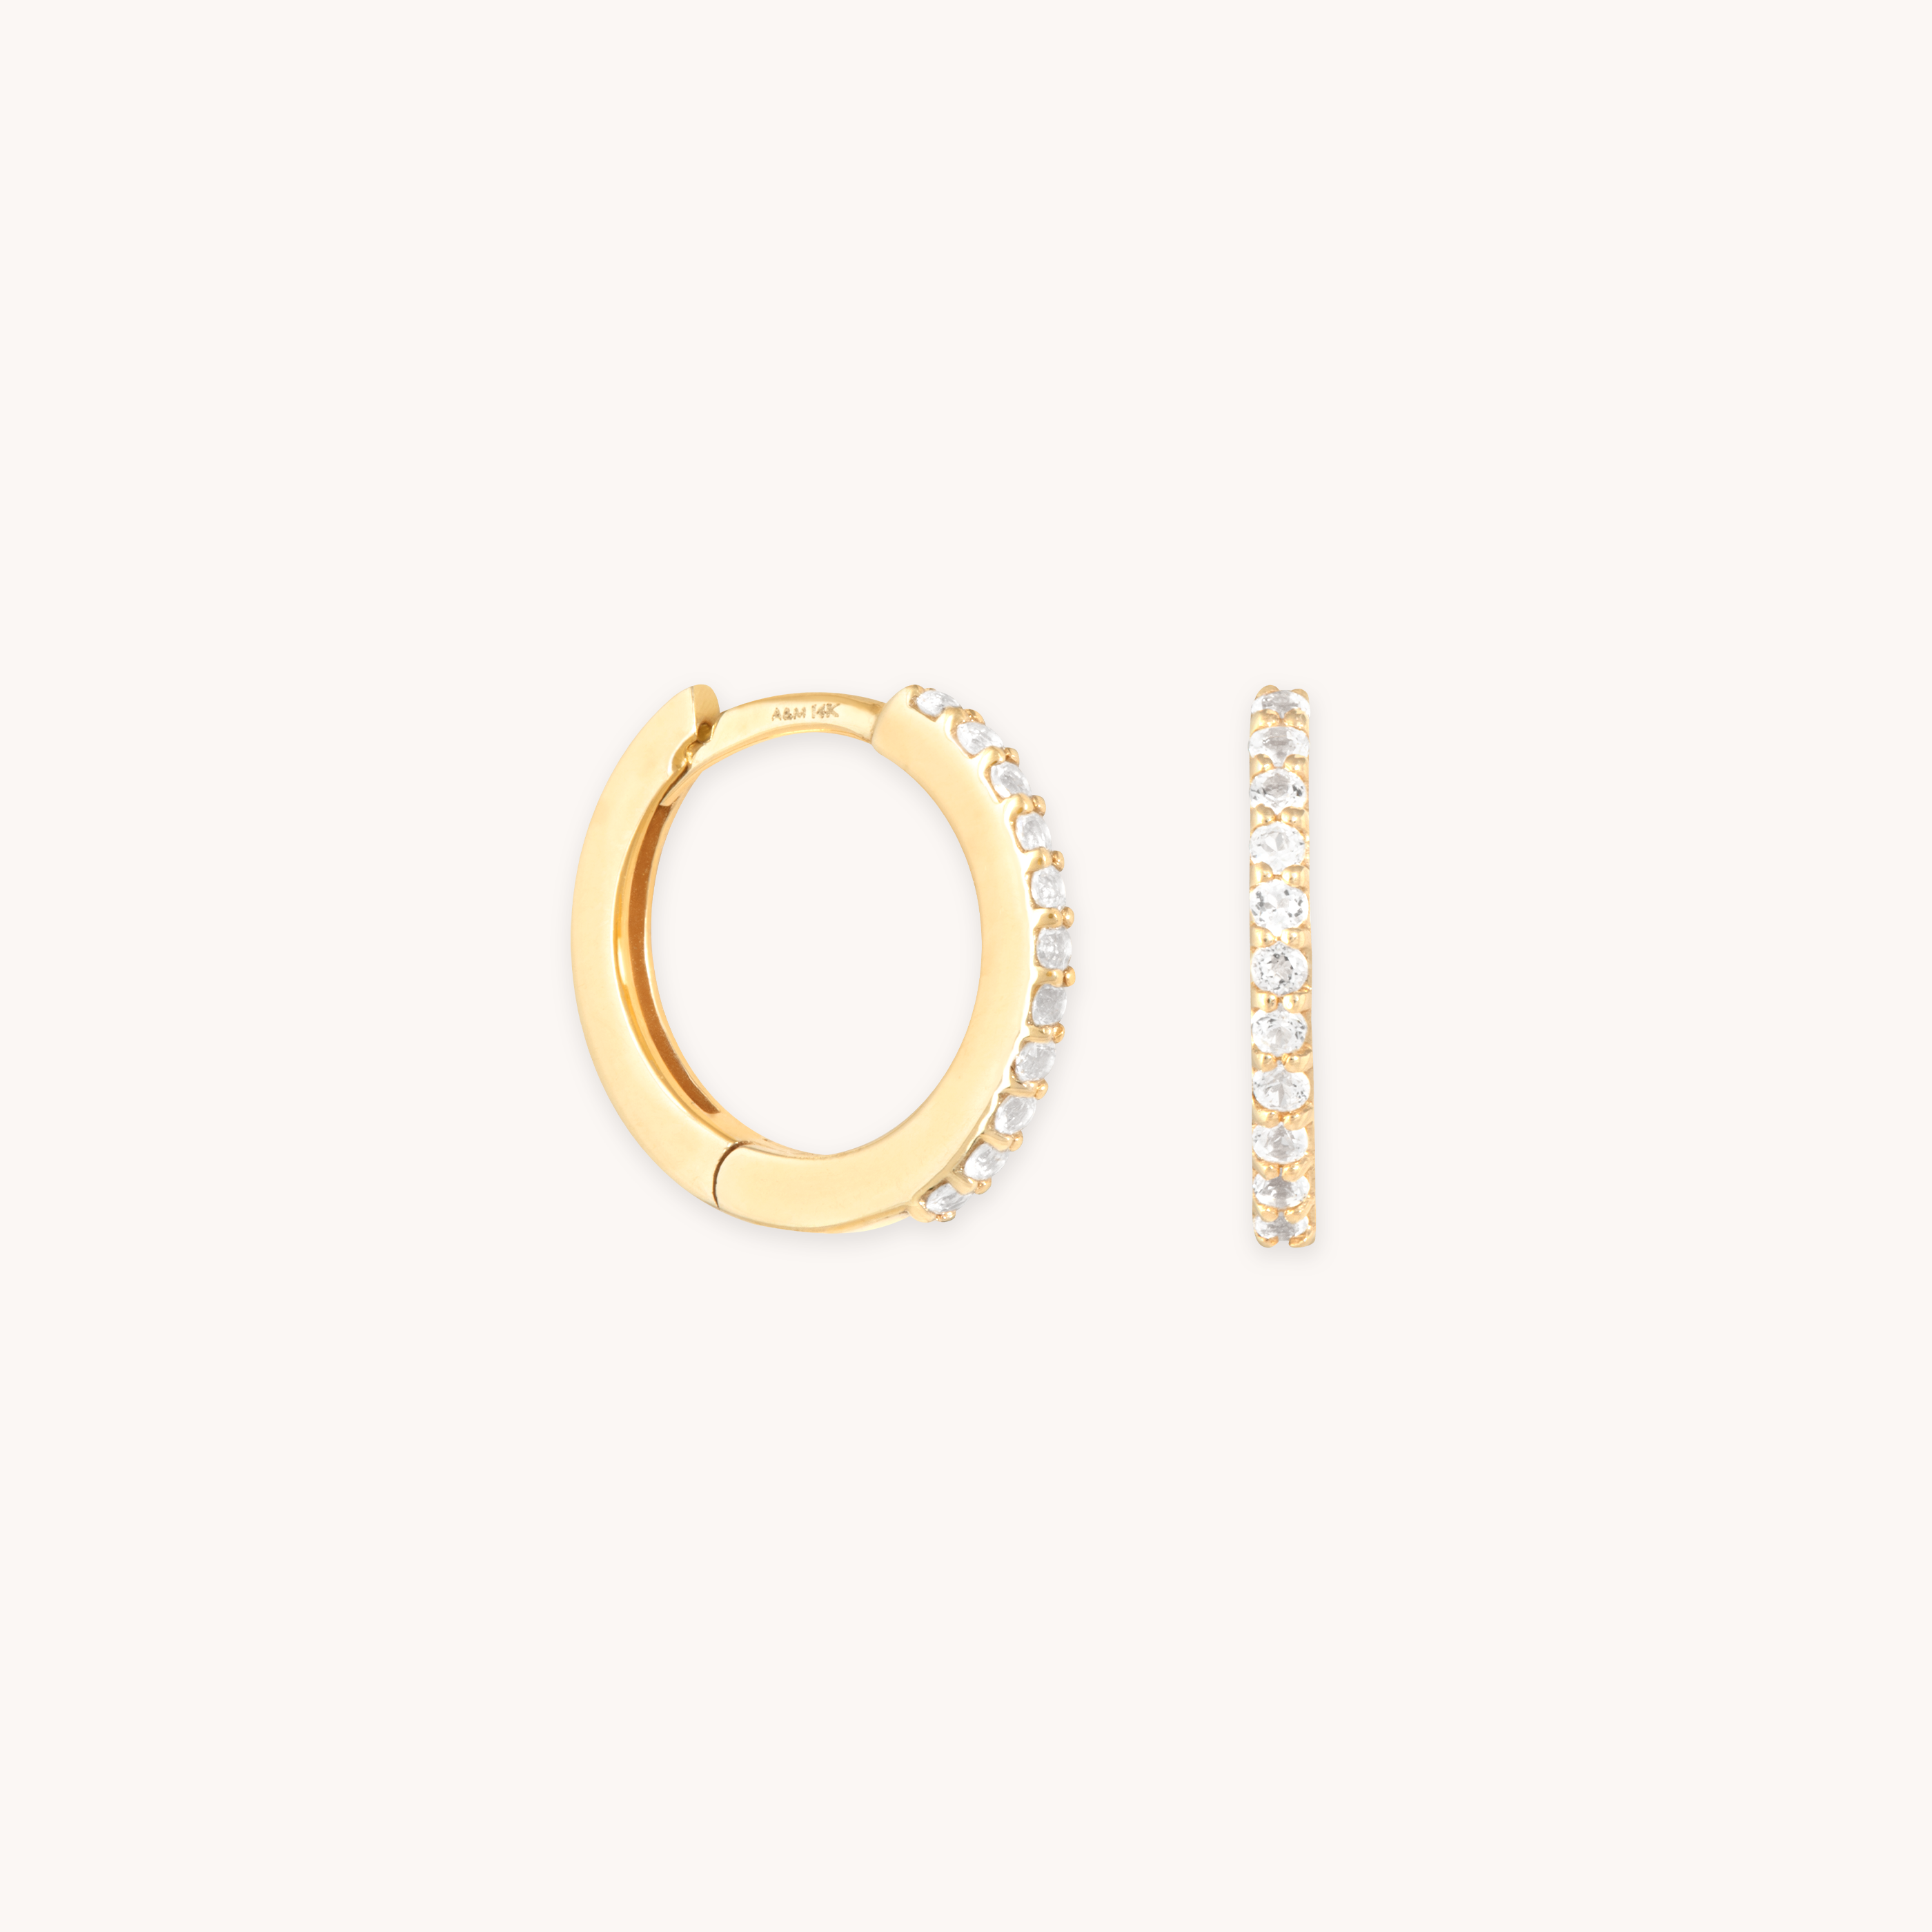 TOPAZ HOOPS IN SOLID GOLD CUT OUT